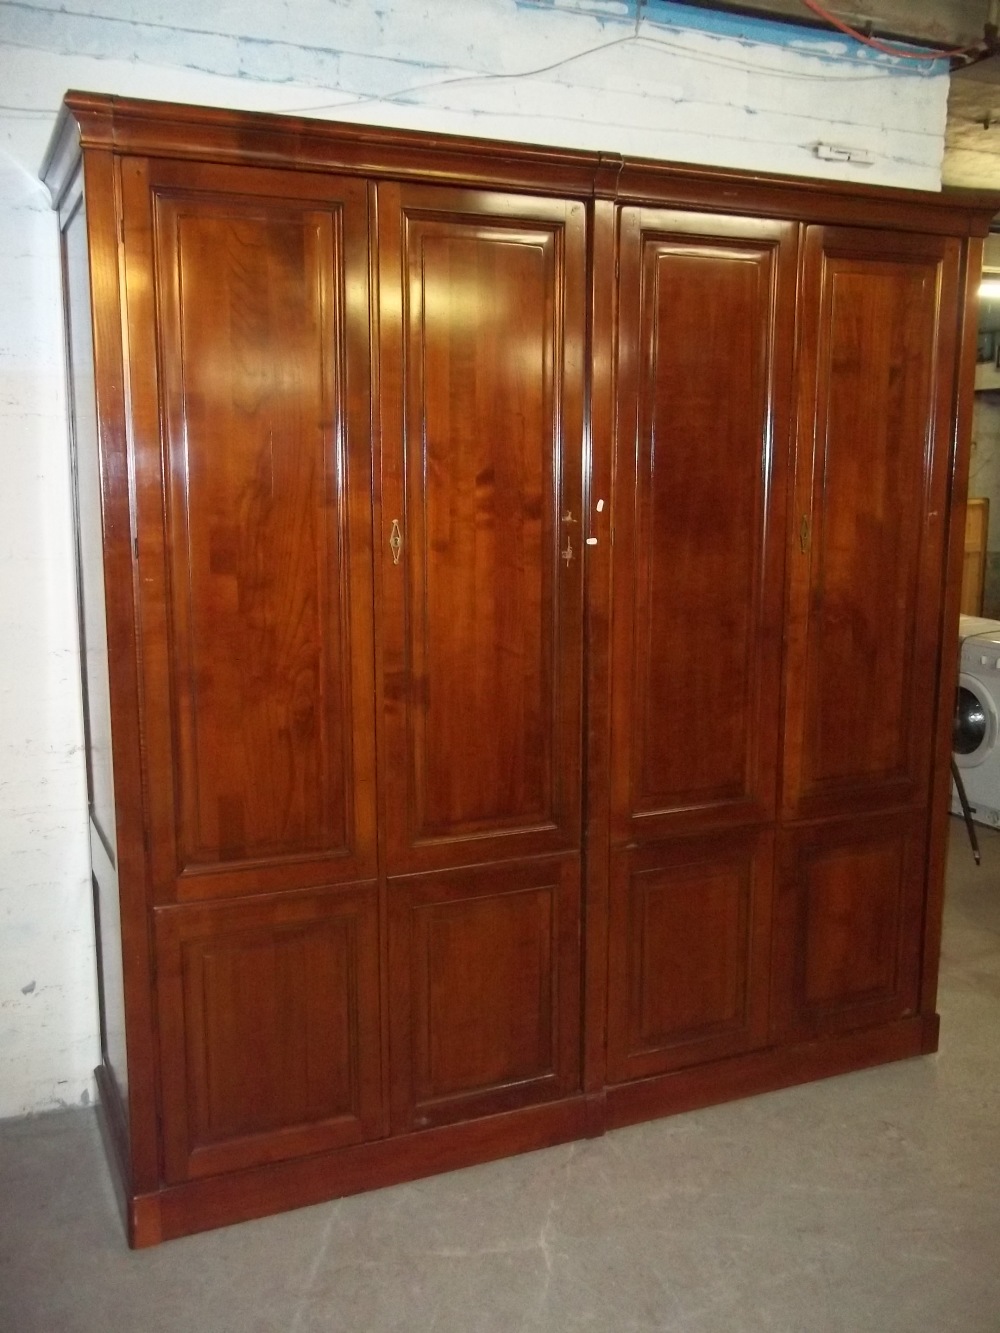 A PAIR OF CHERRYWOOD FULL LENGTH WARDROBES W 214 CM, H 223 CM, D 60 CM, one unit but can be split - Image 4 of 5